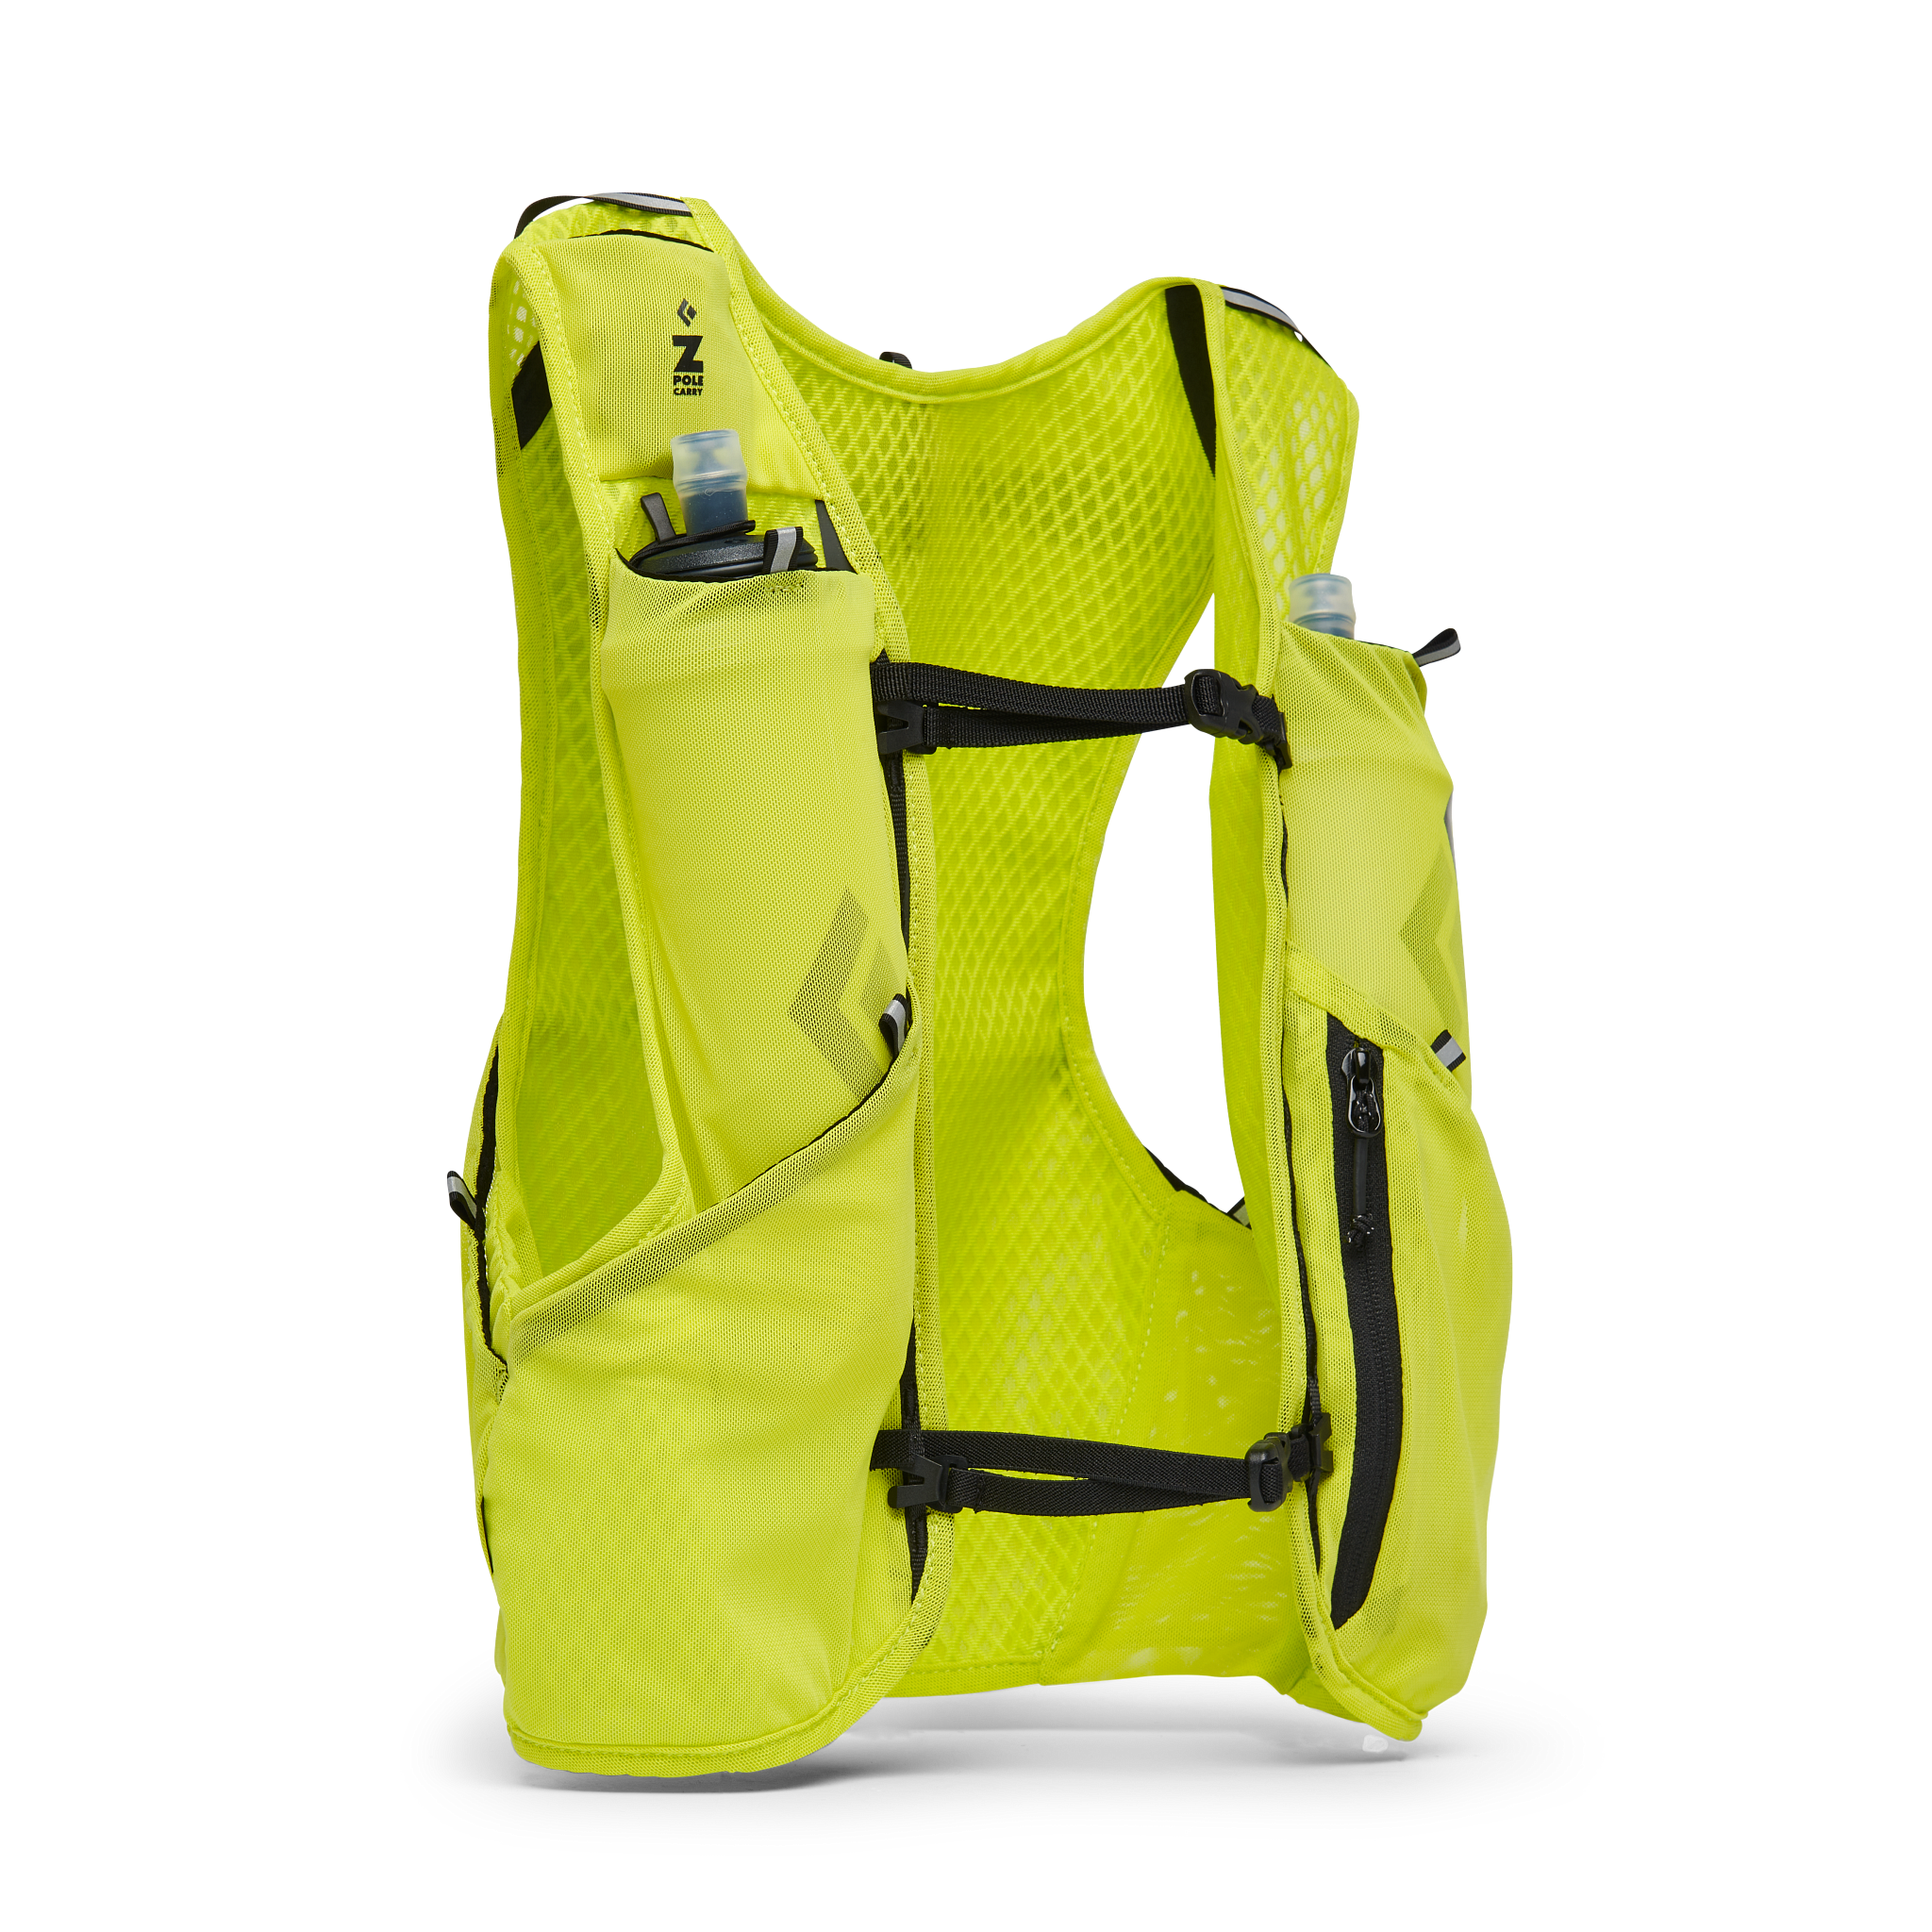 Black Diamond Equipment Distance 4 Hydration Vest Backpack, Small Optical Yellow